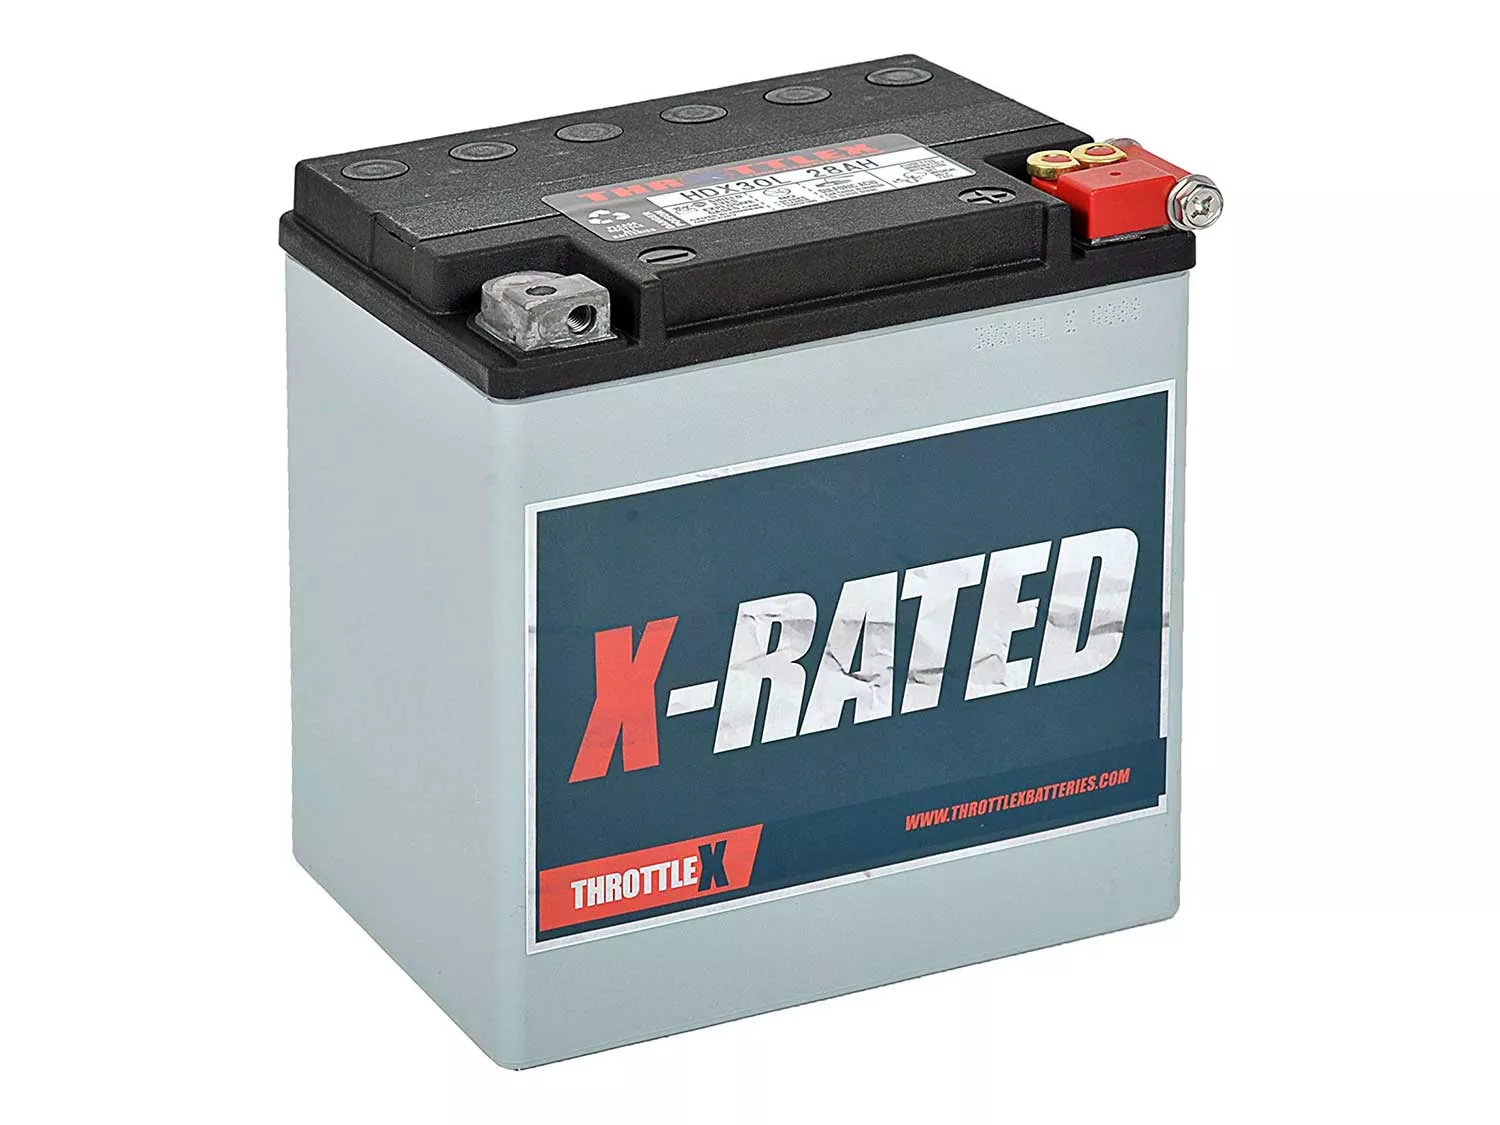 THROTTLEX HDX30L - MADE IN AMERICA - Harley Davidson Replacement Motorcycle Battery